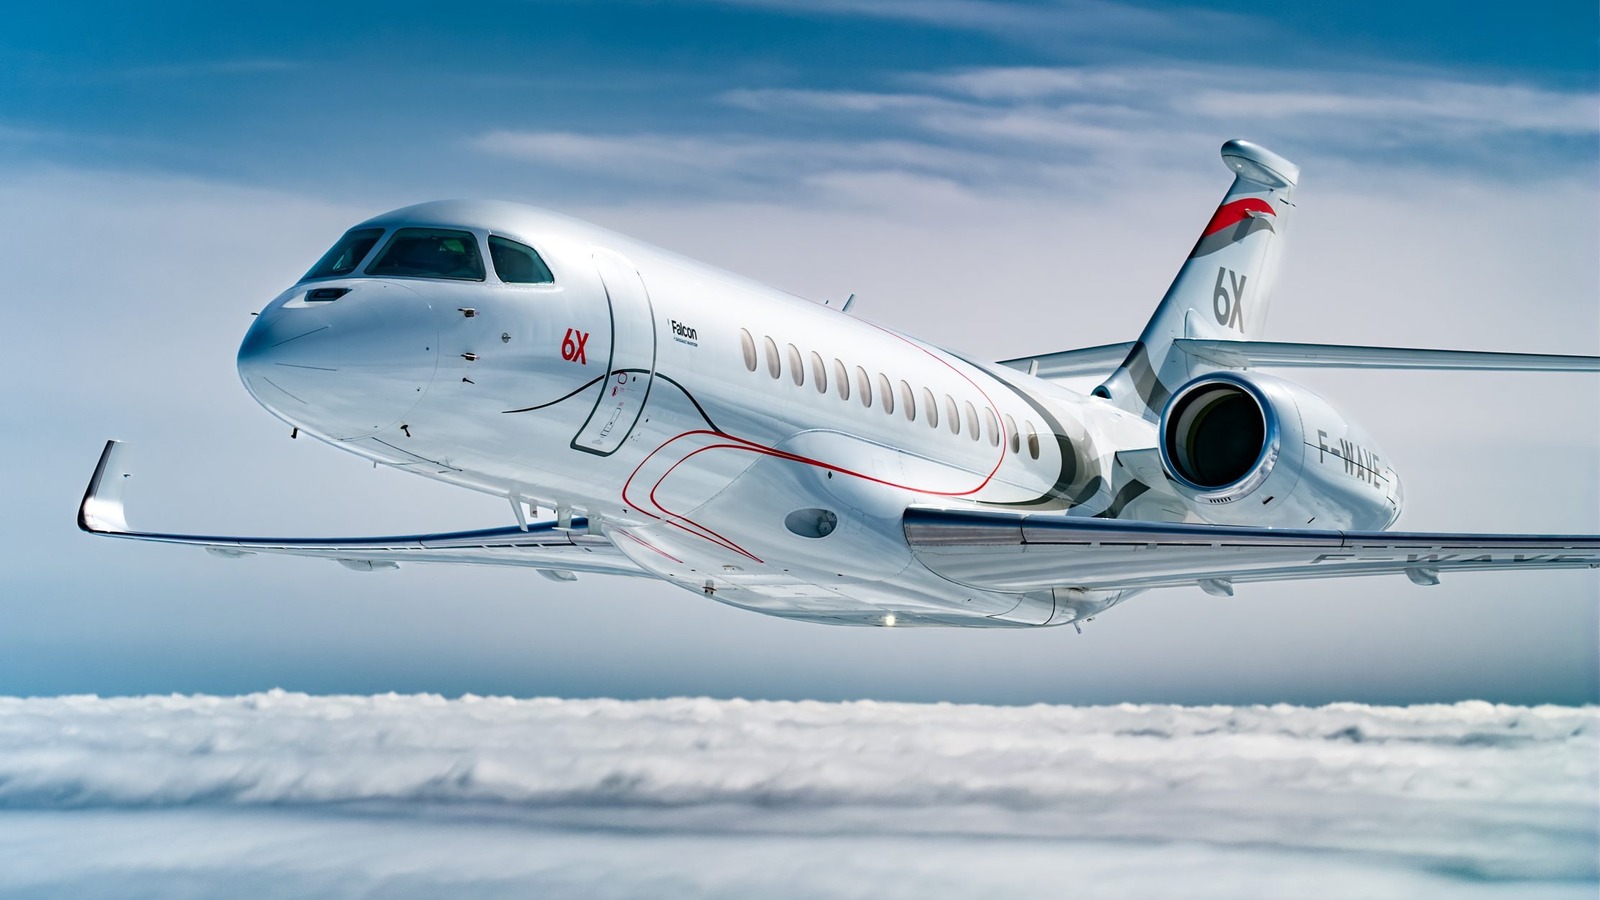 8 Of The Best Private Jet Manufacturers From Around The World – SlashGear